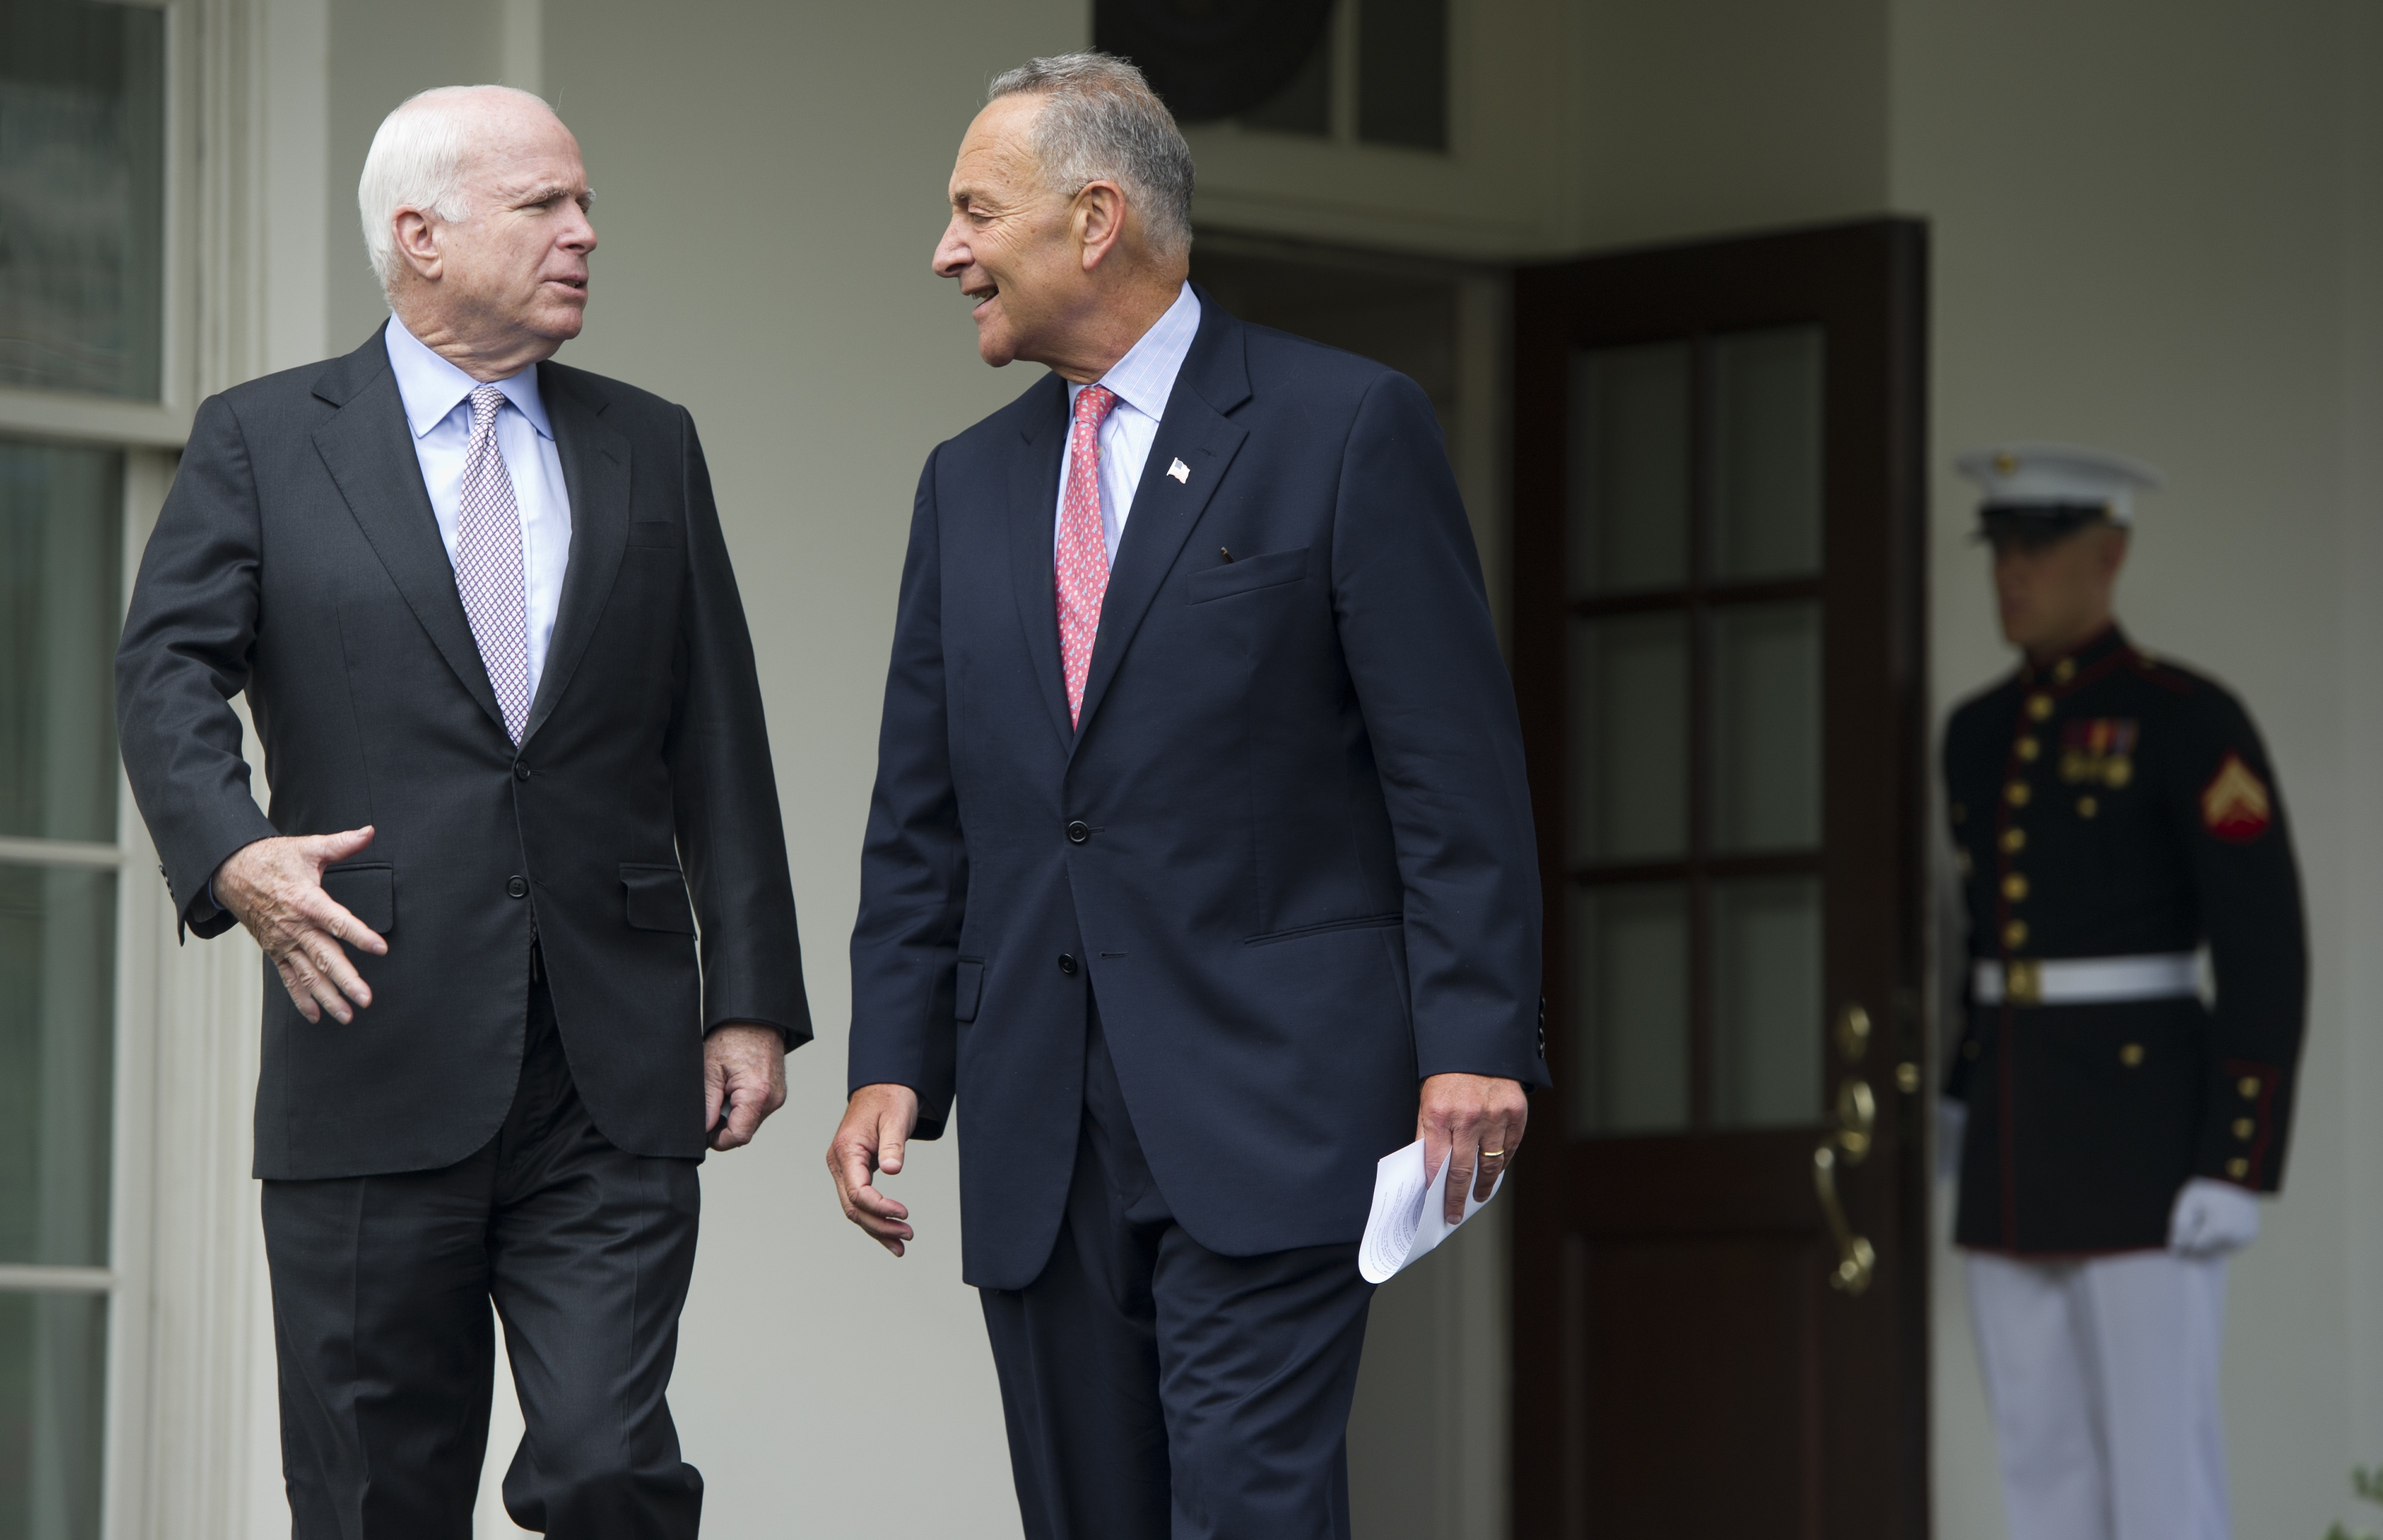 Chuck Schumer (r.) and John McCain walk out of the West Wing of the White House in 2013.